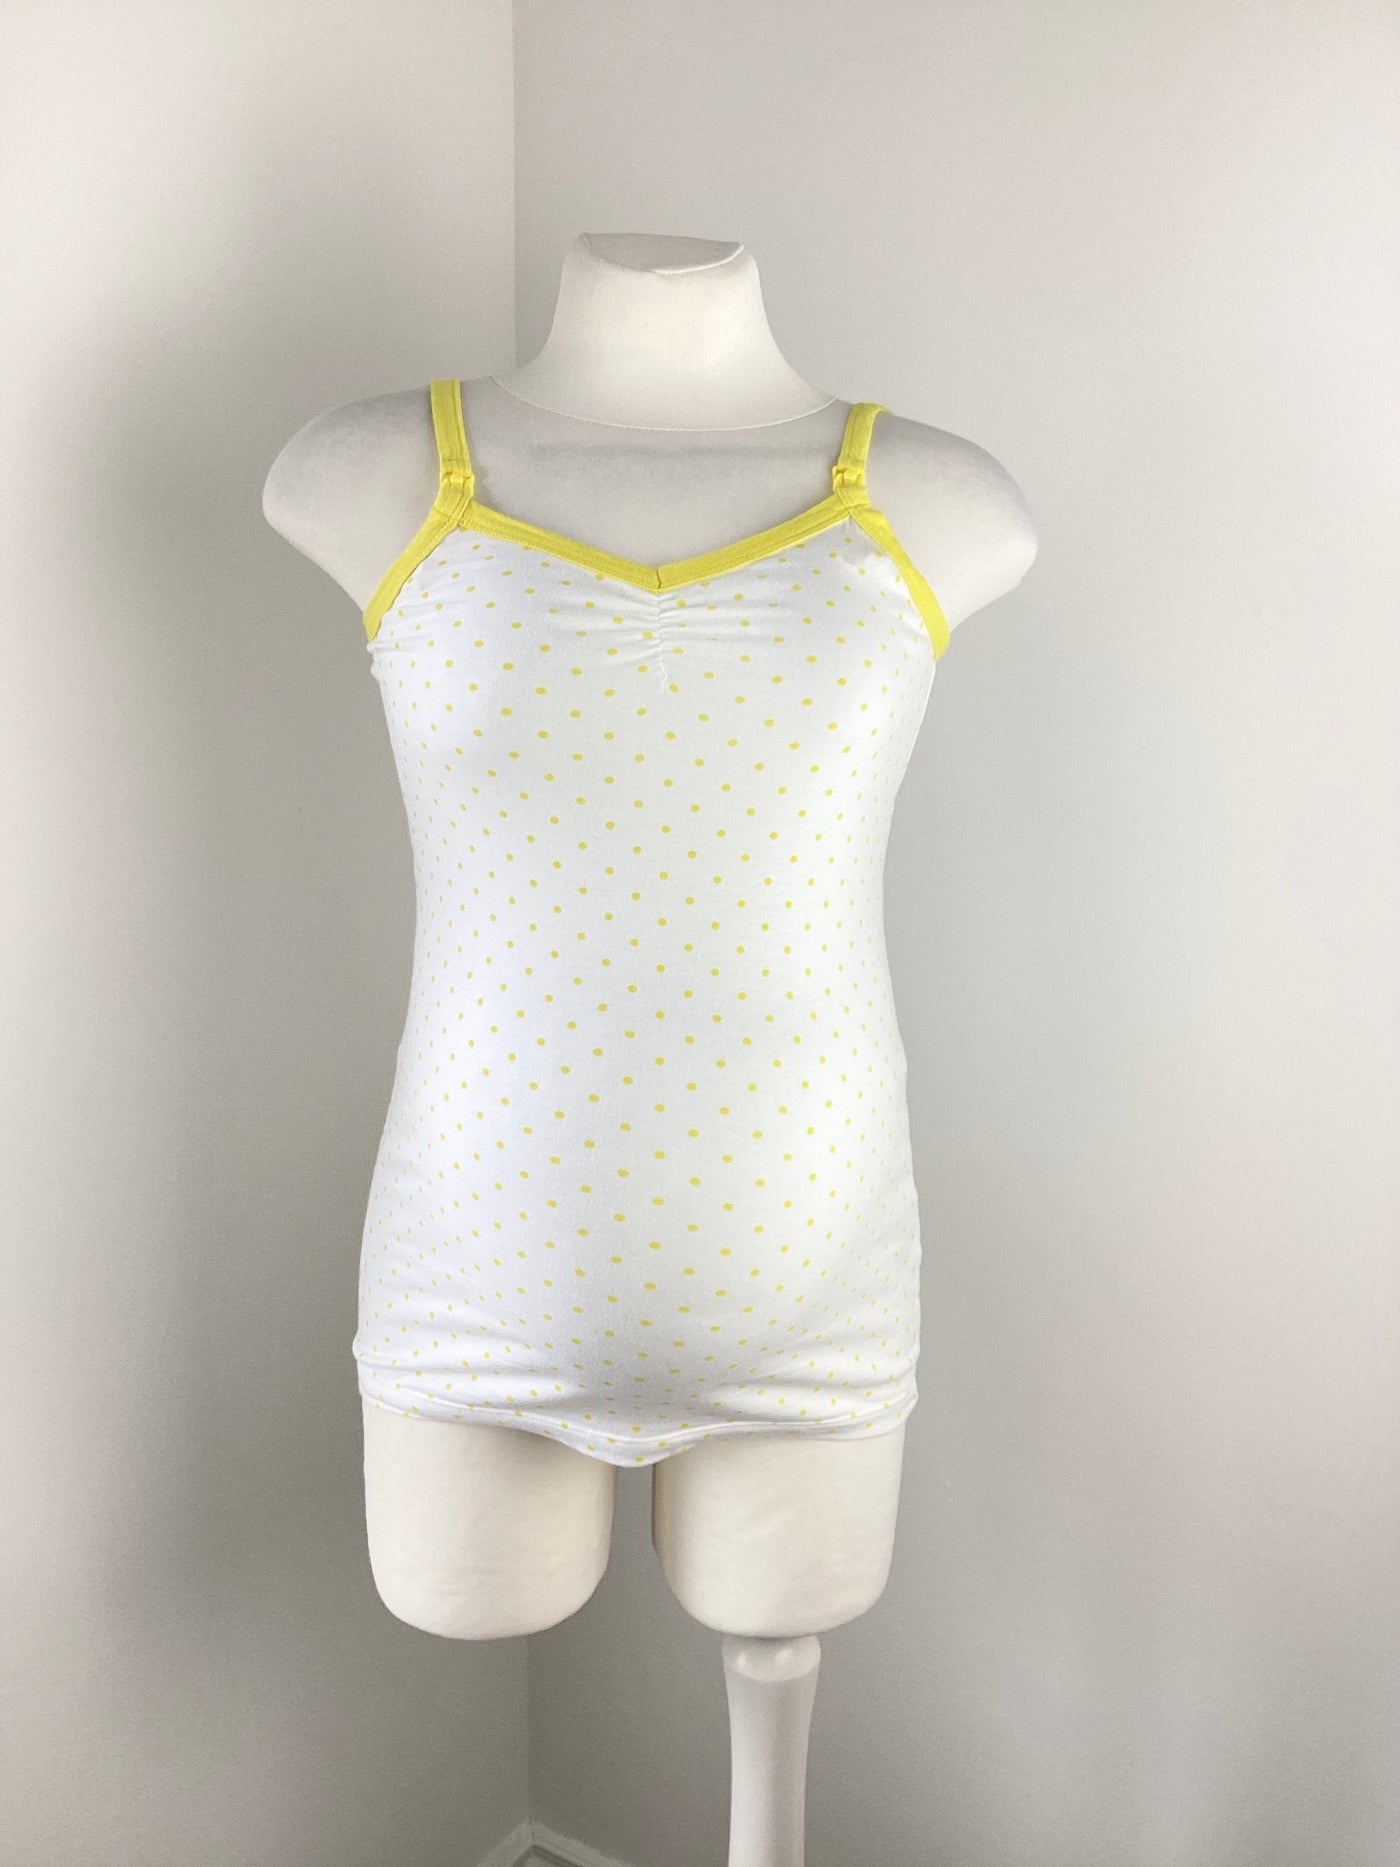 Blooming Marvellous white & neon yellow polkadot camisole nursing top - Size S (Approx UK 8/10)